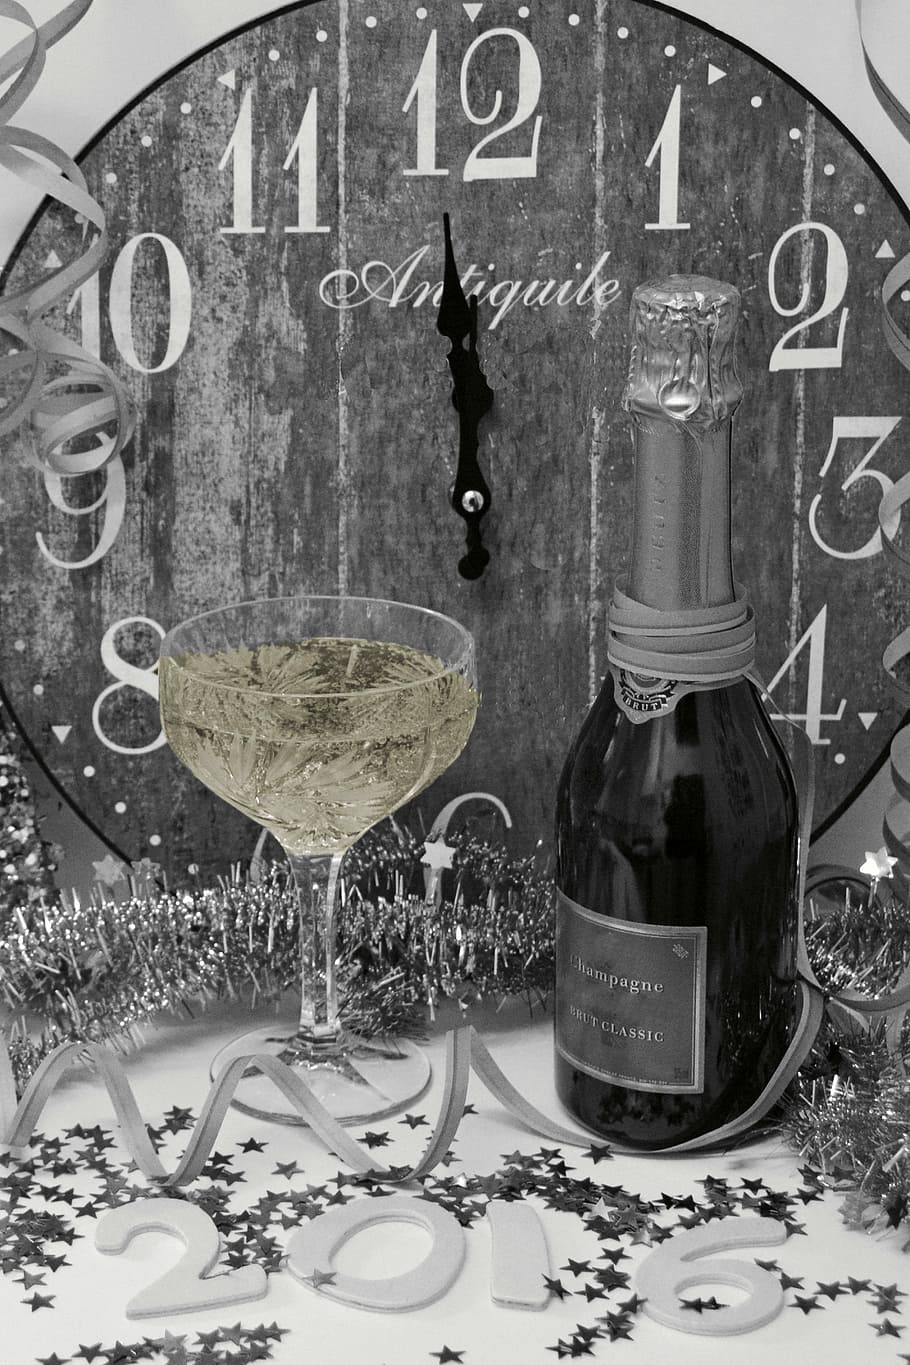 grayscale photography, wine bottle, wine glass, new year's eve, new year's greetings, clock, champagne, new year, abut, drink